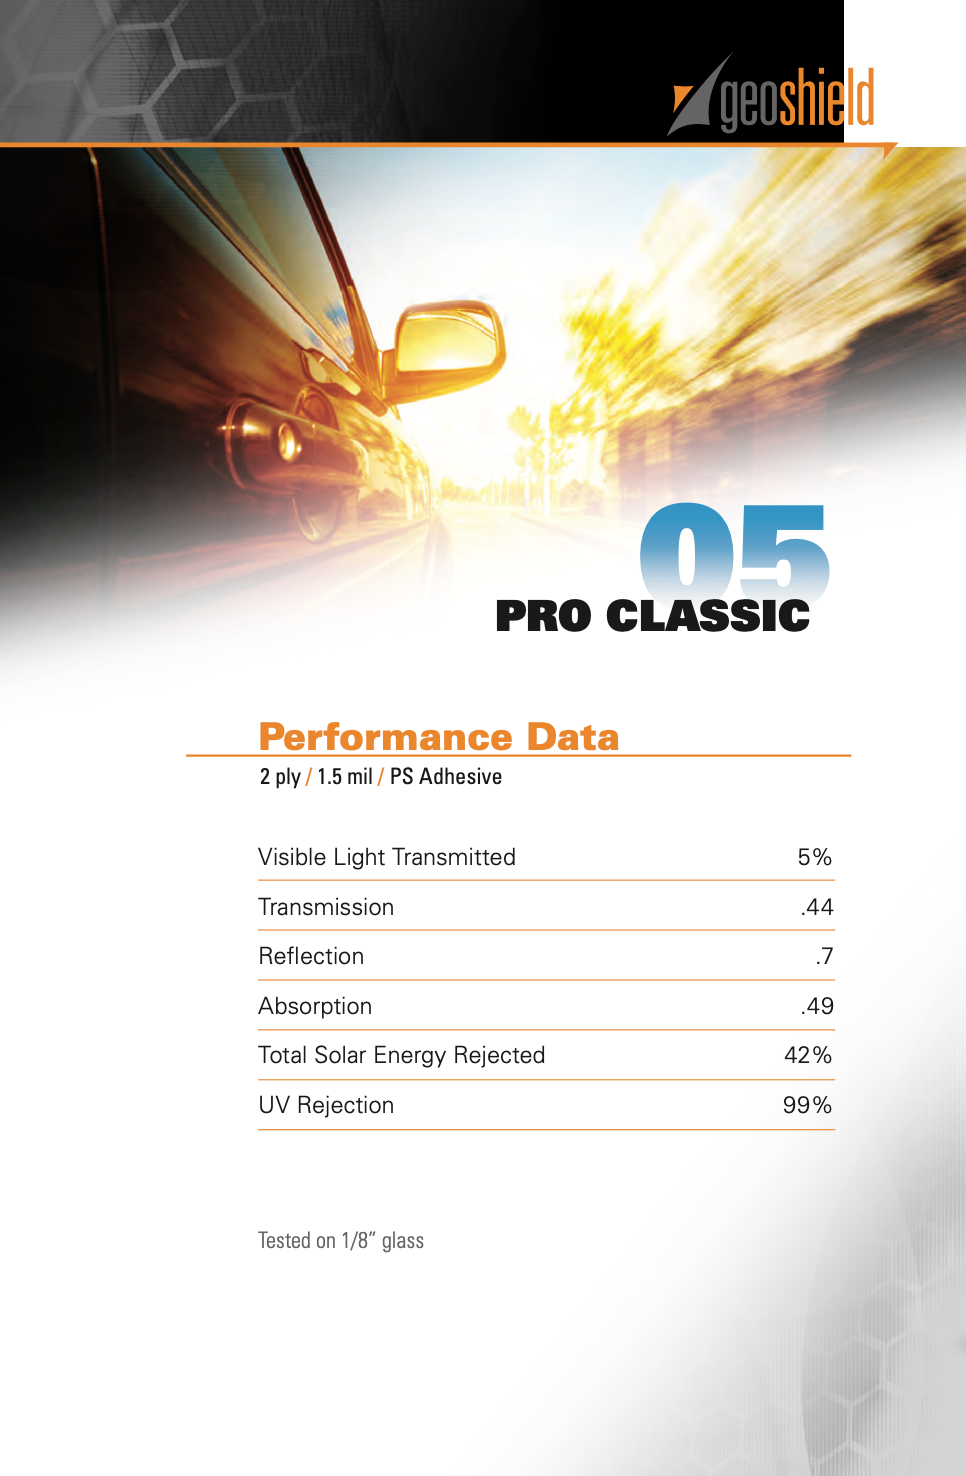 Performance data for Pro Classic 5%